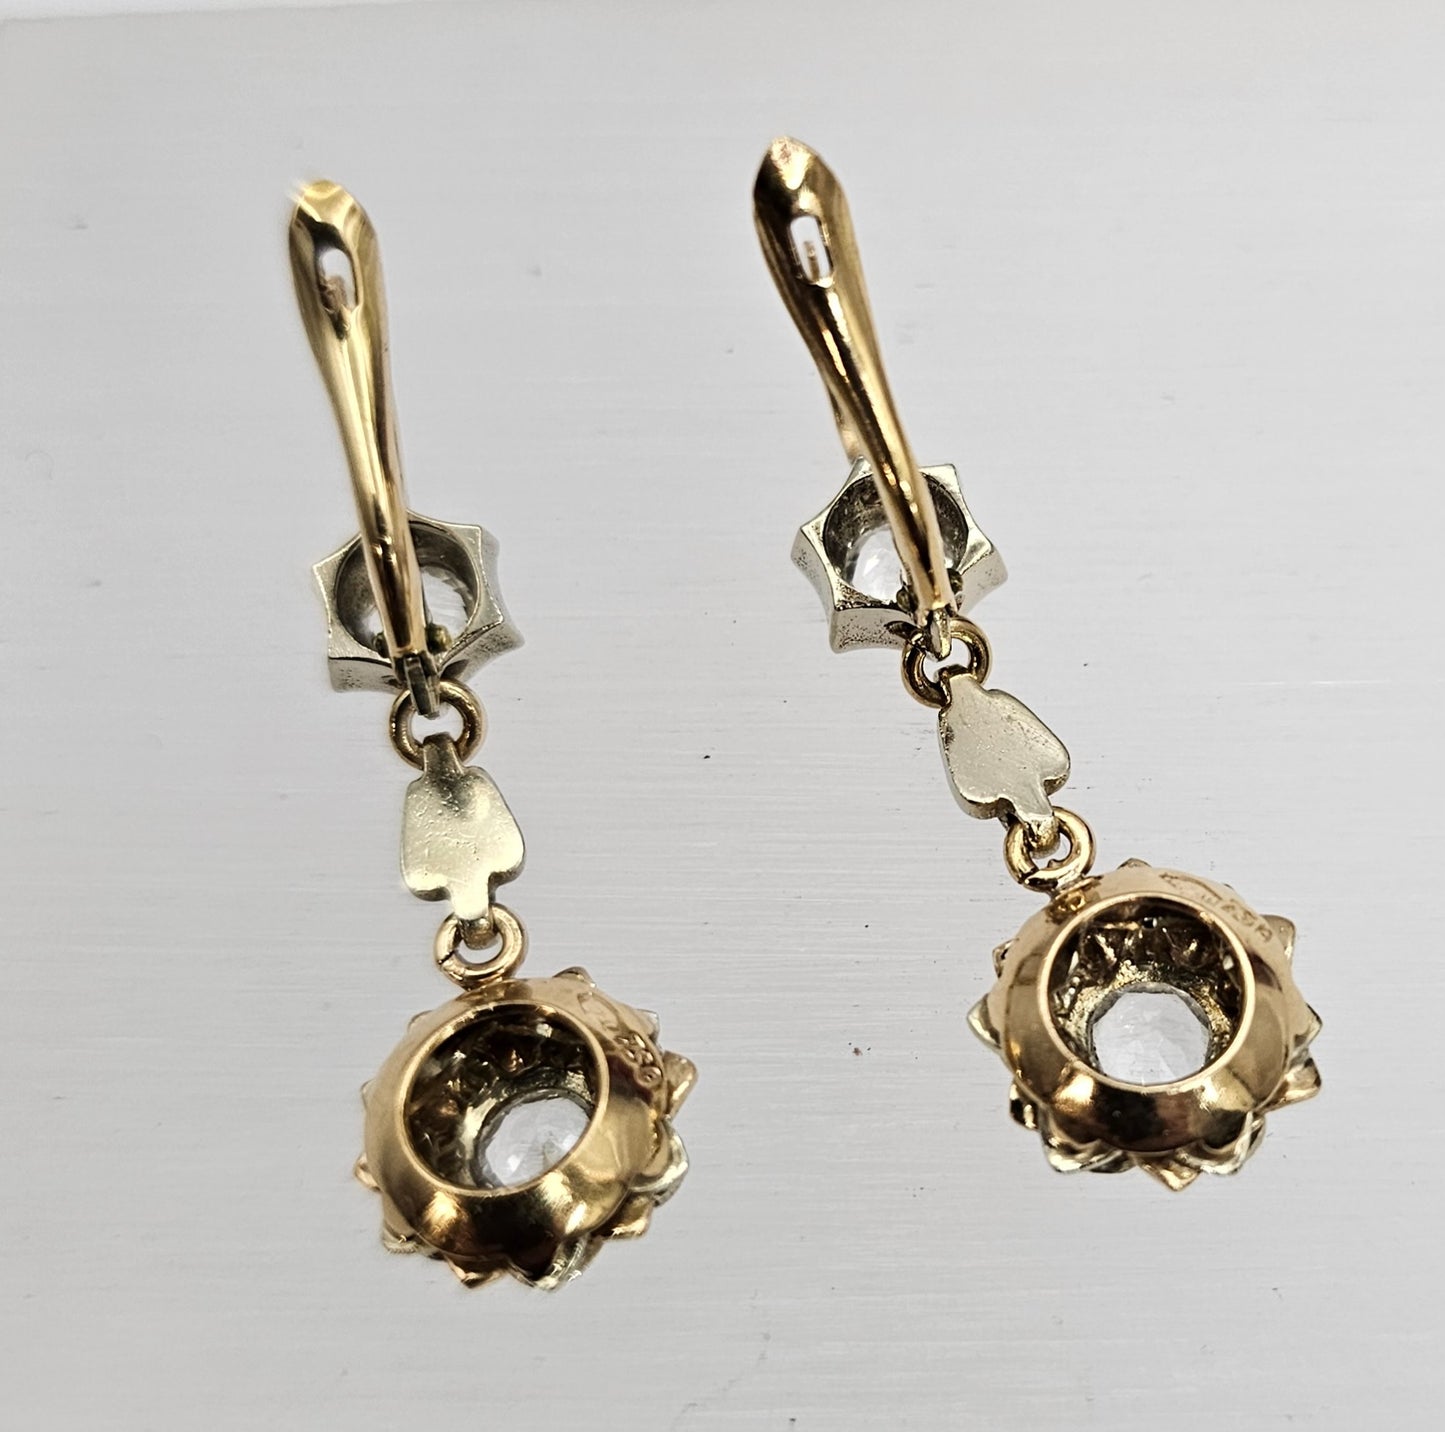 Antique 18ct gold earrings